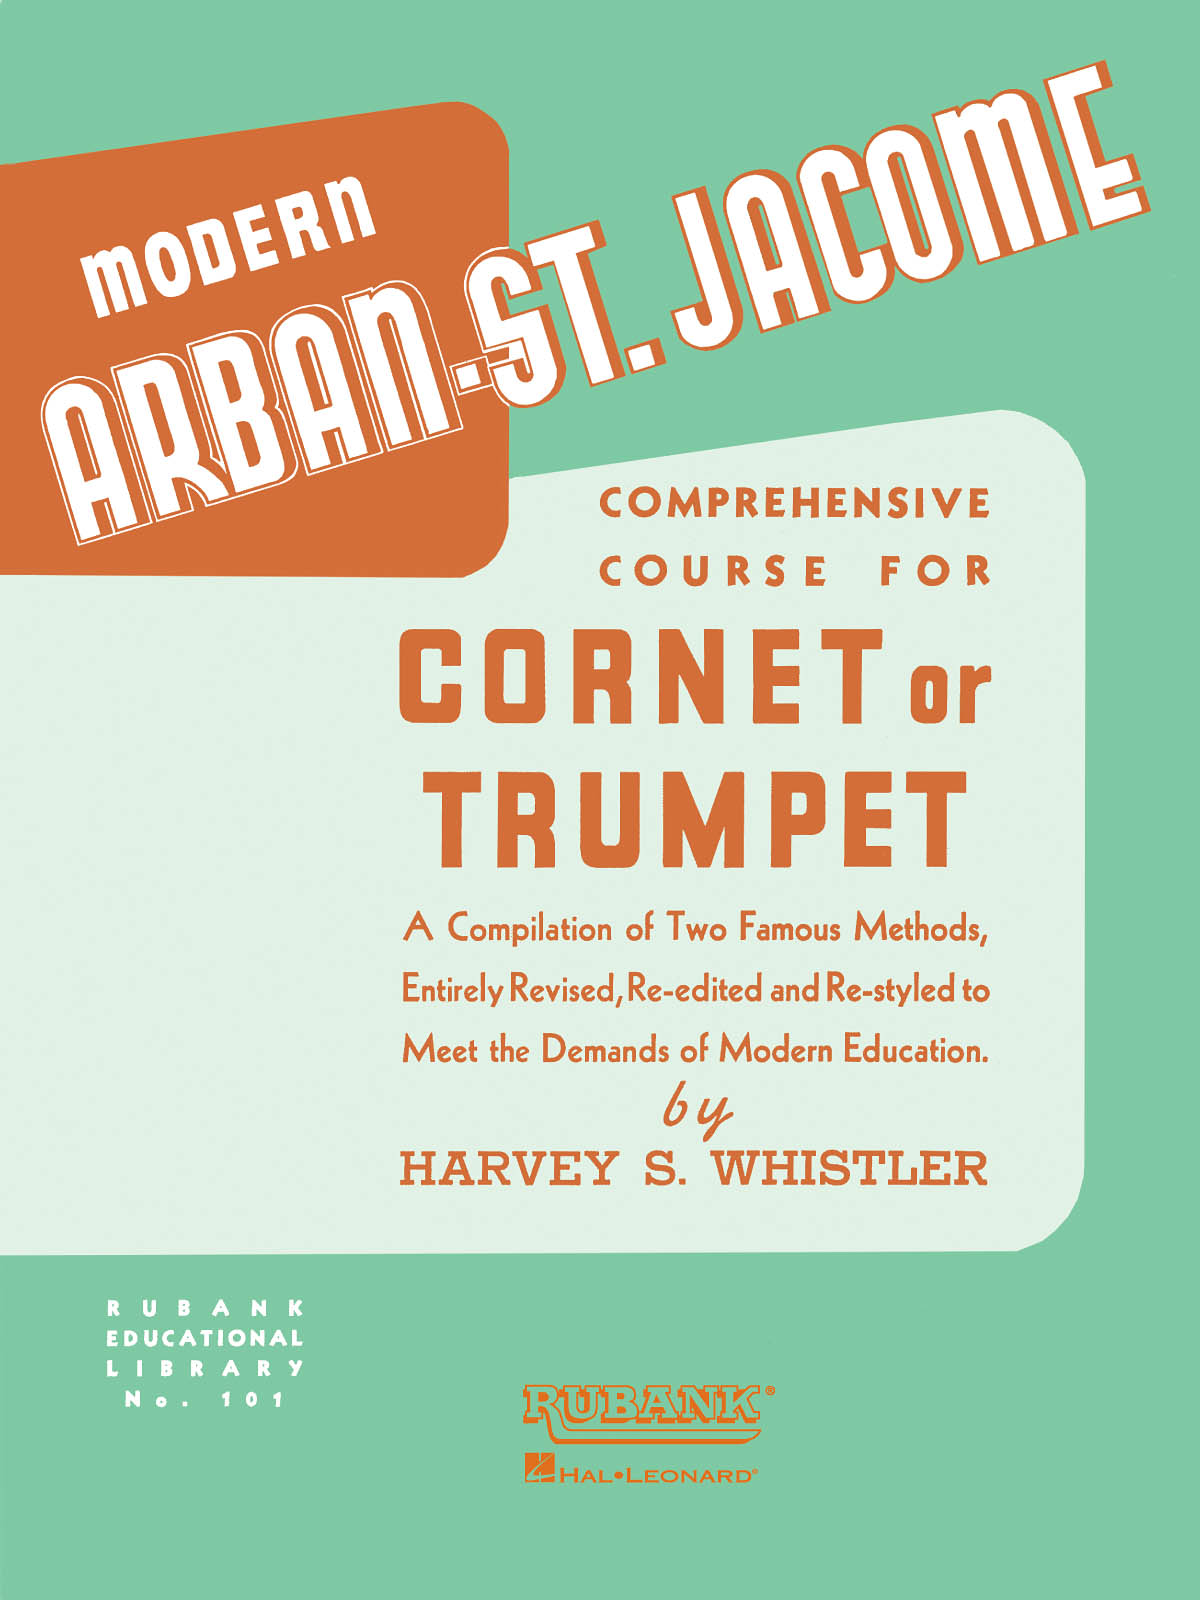 Arban-St. Jacome Method for Cornet or Trumpet